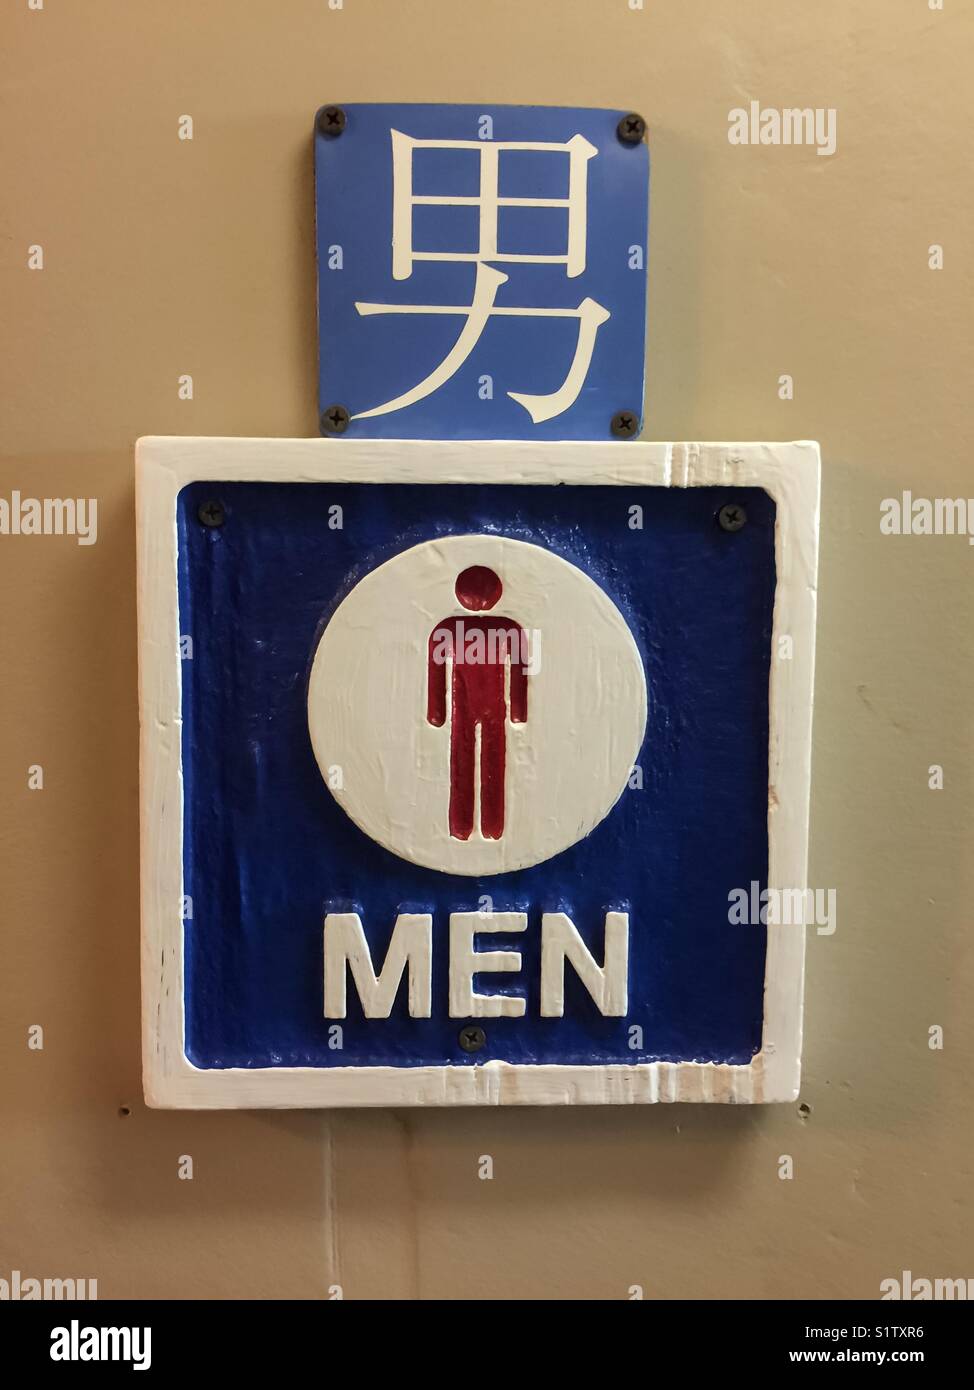 Men’s, a pictograph and sign in English and Chinese Stock Photo